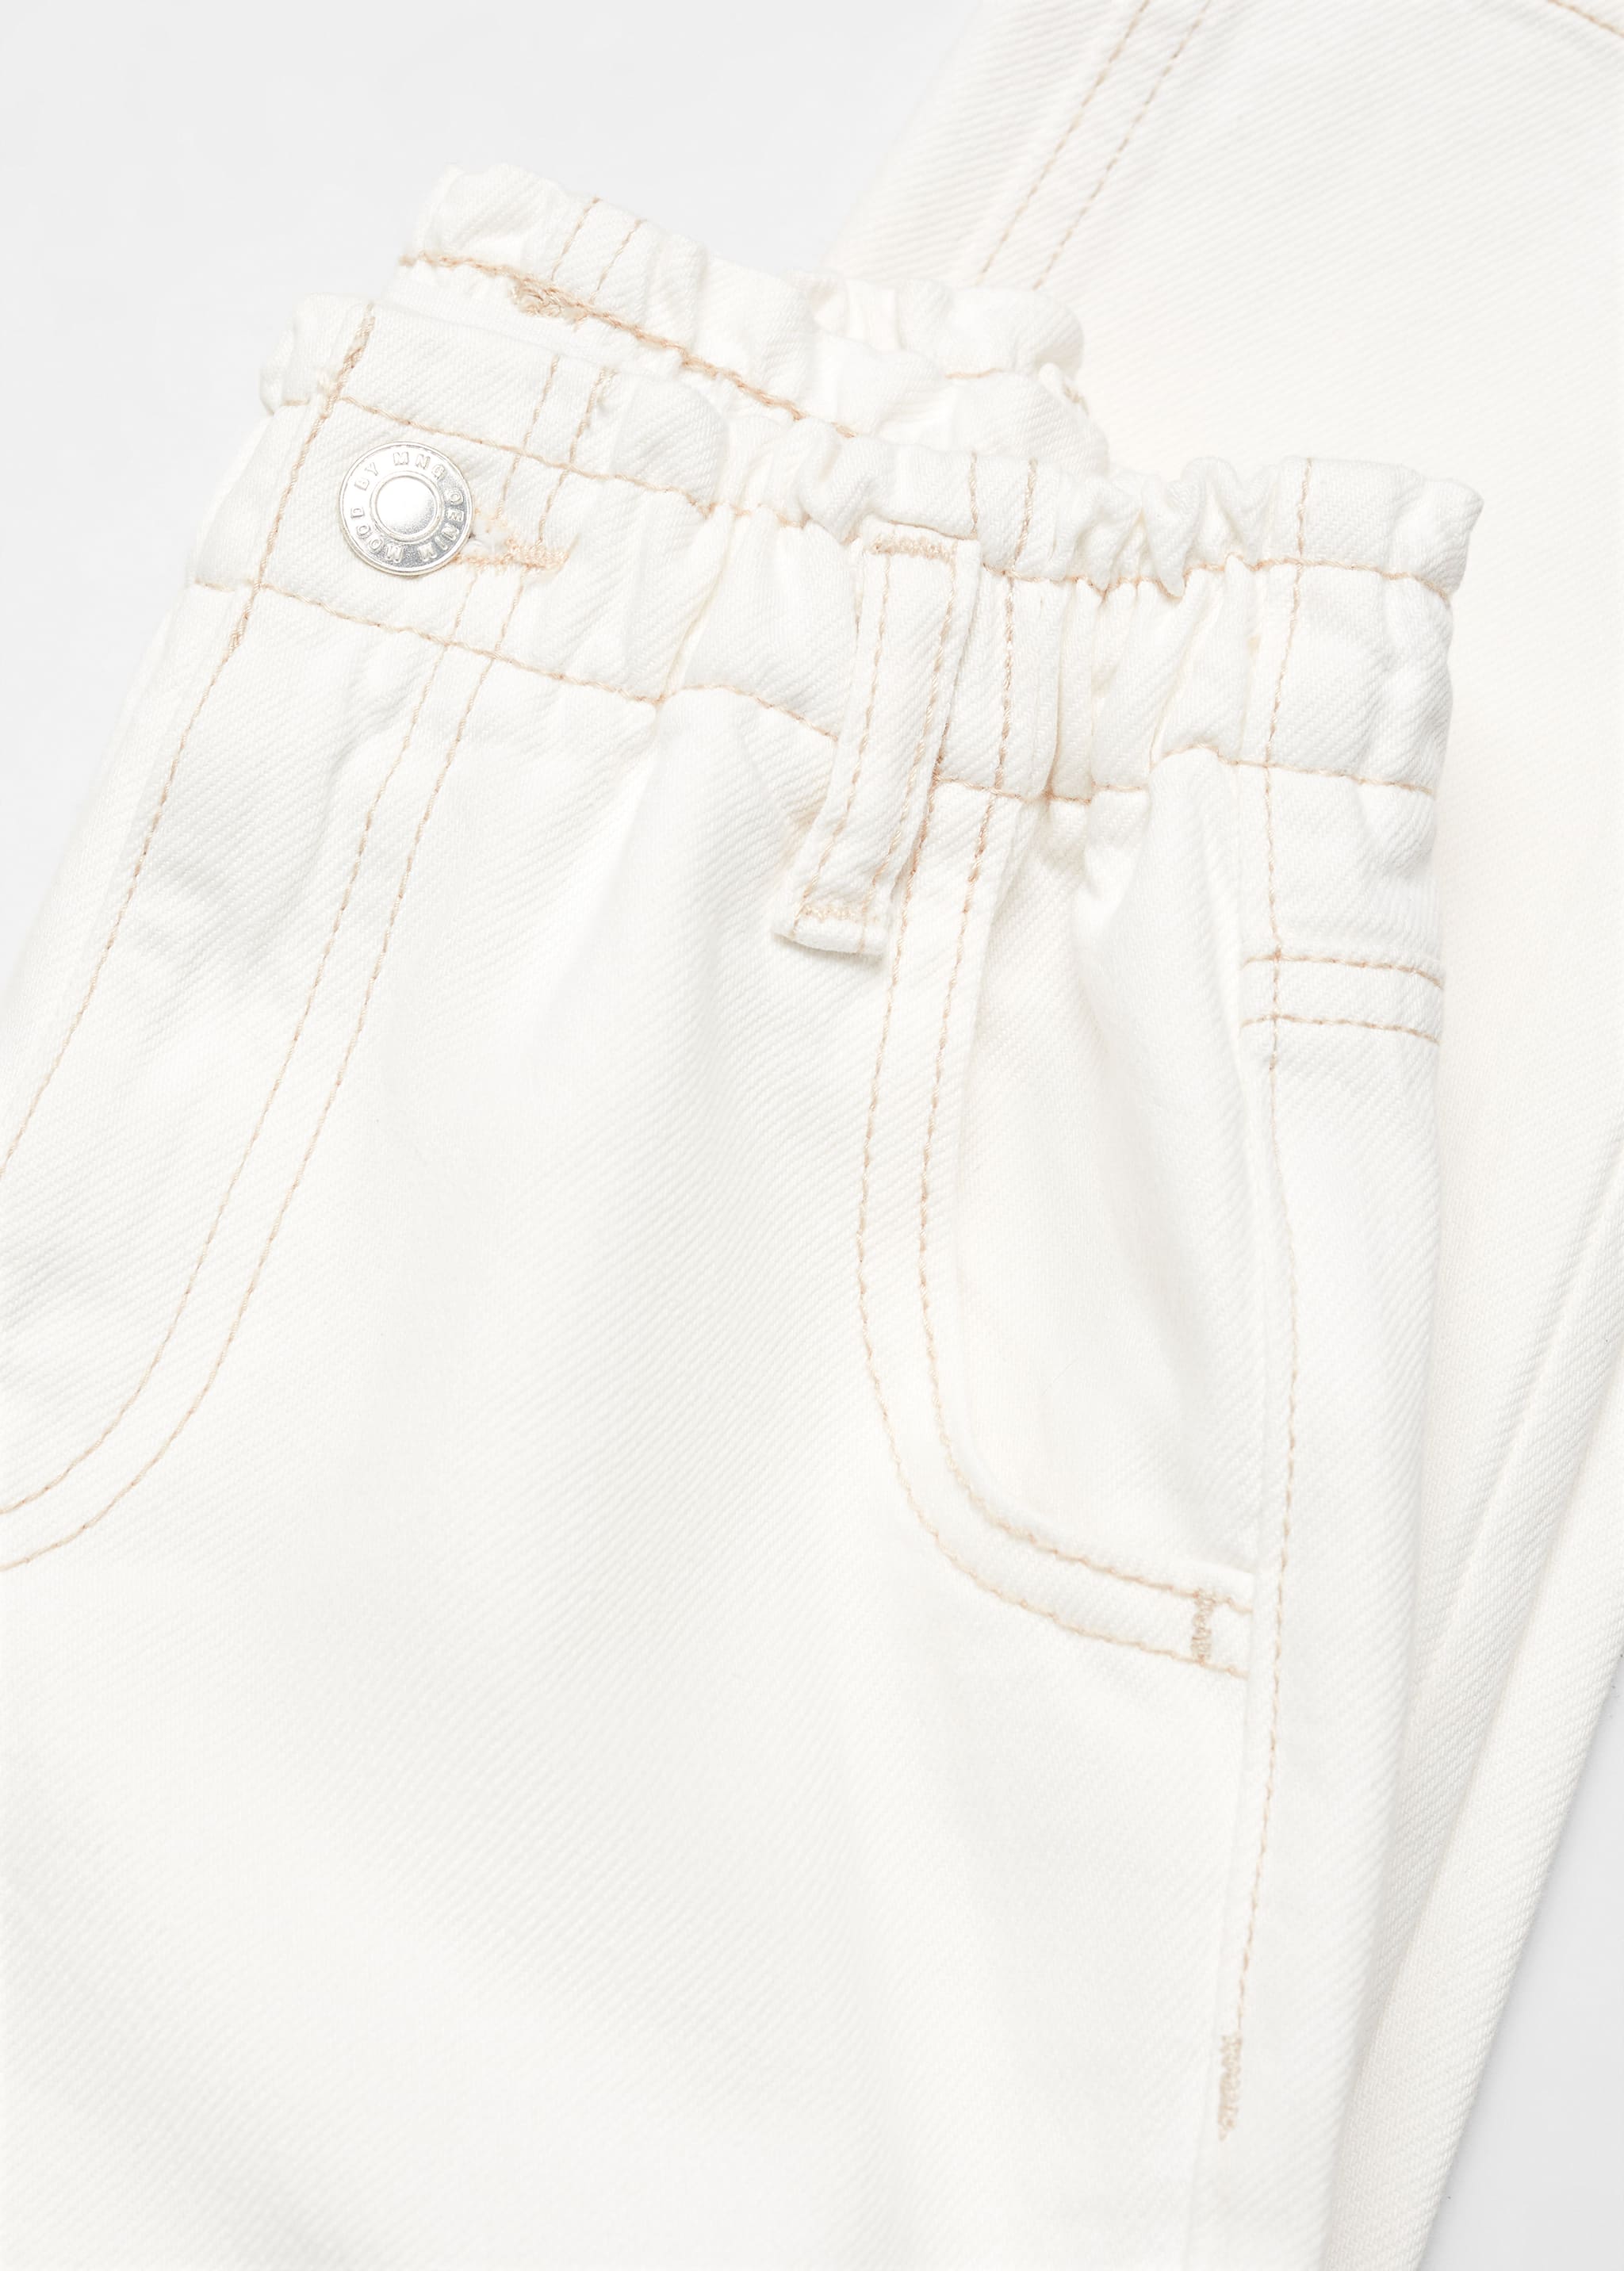 Paperbag jeans - Details of the article 8